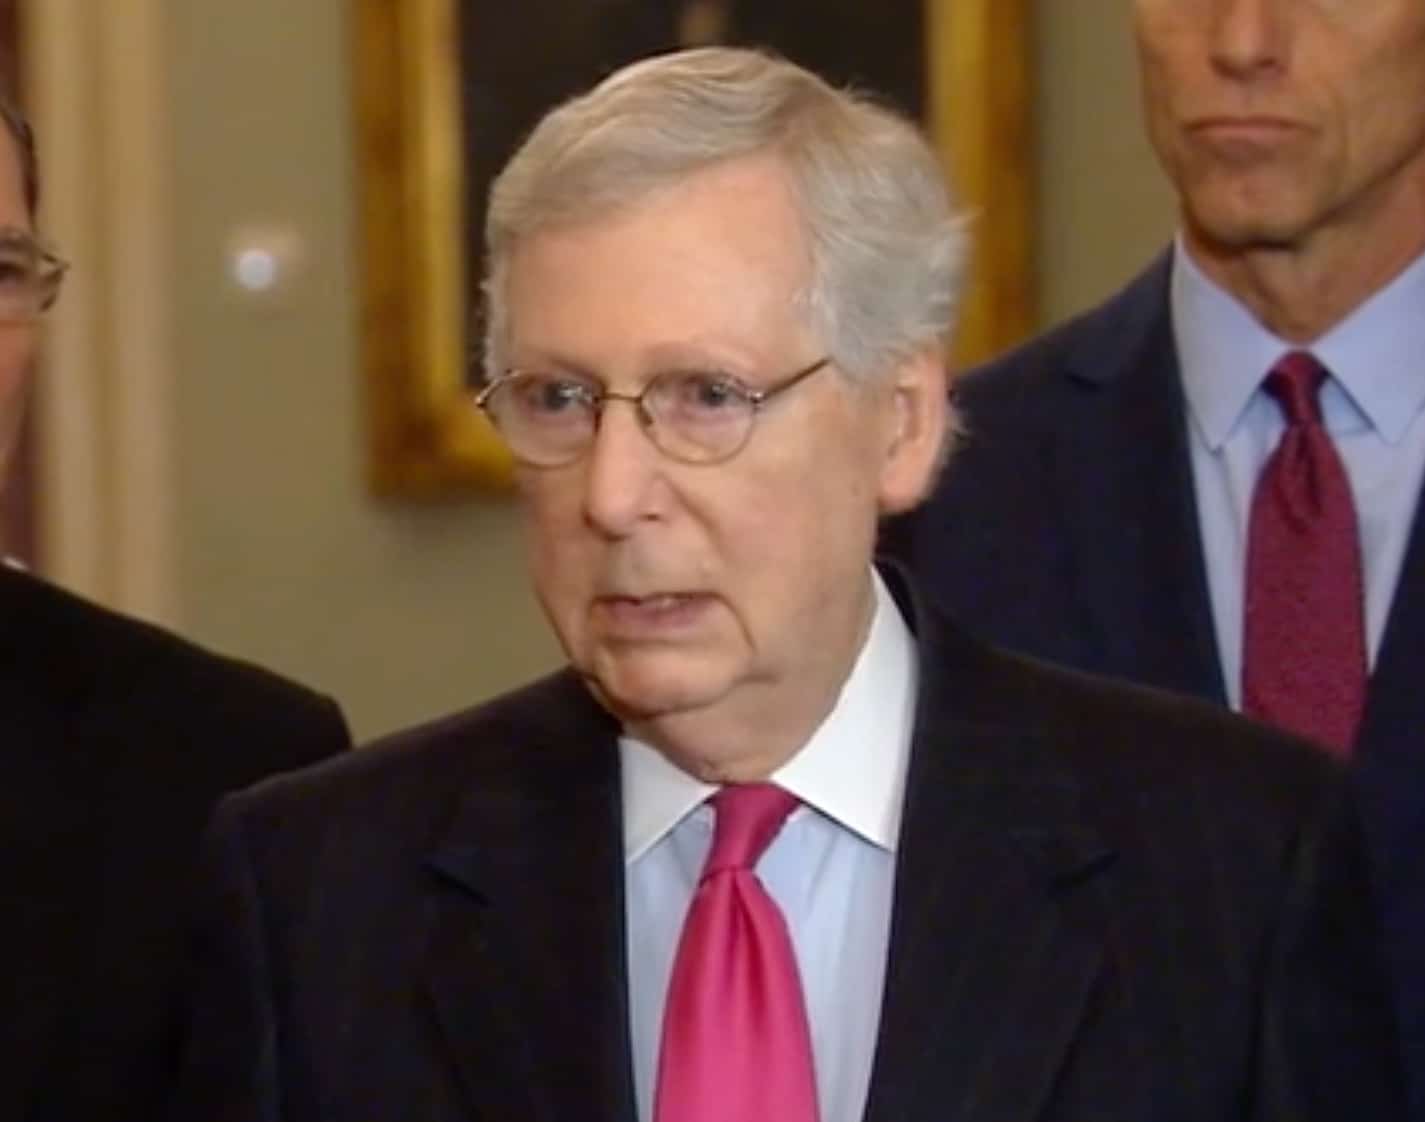 Sen. McConnell acknowledged human-caused climate change in response to the Green New Deal